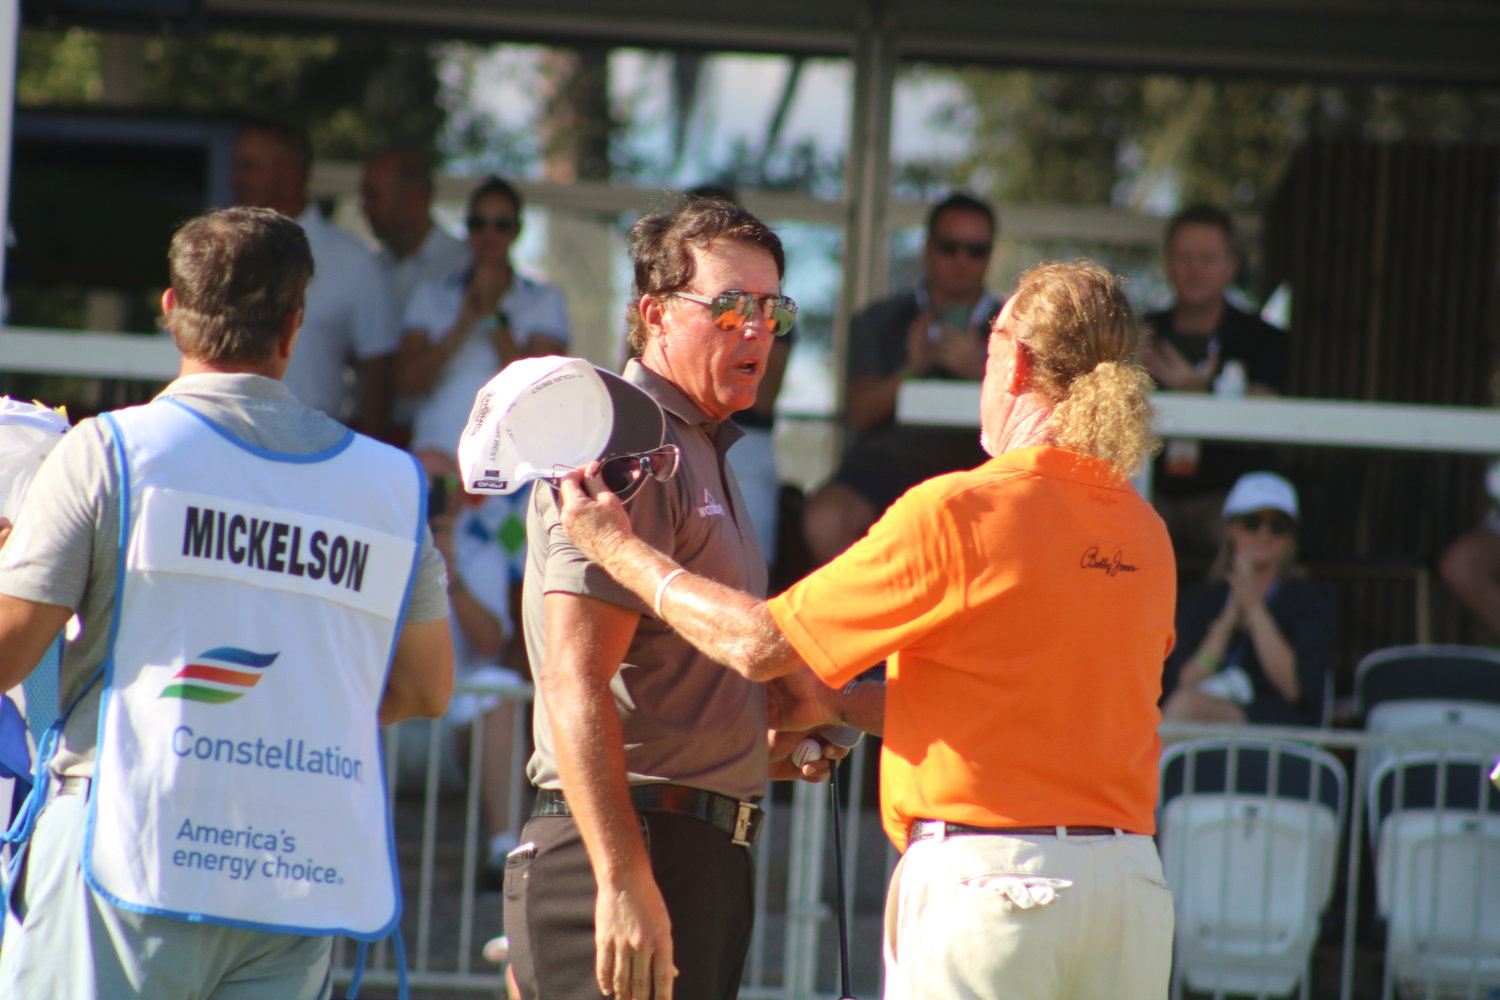 Mickelson and runner-up Miguel Angel Jimenez of Spain shake hands on the 18th green after the event. The two battled for the top spot down the stretch.